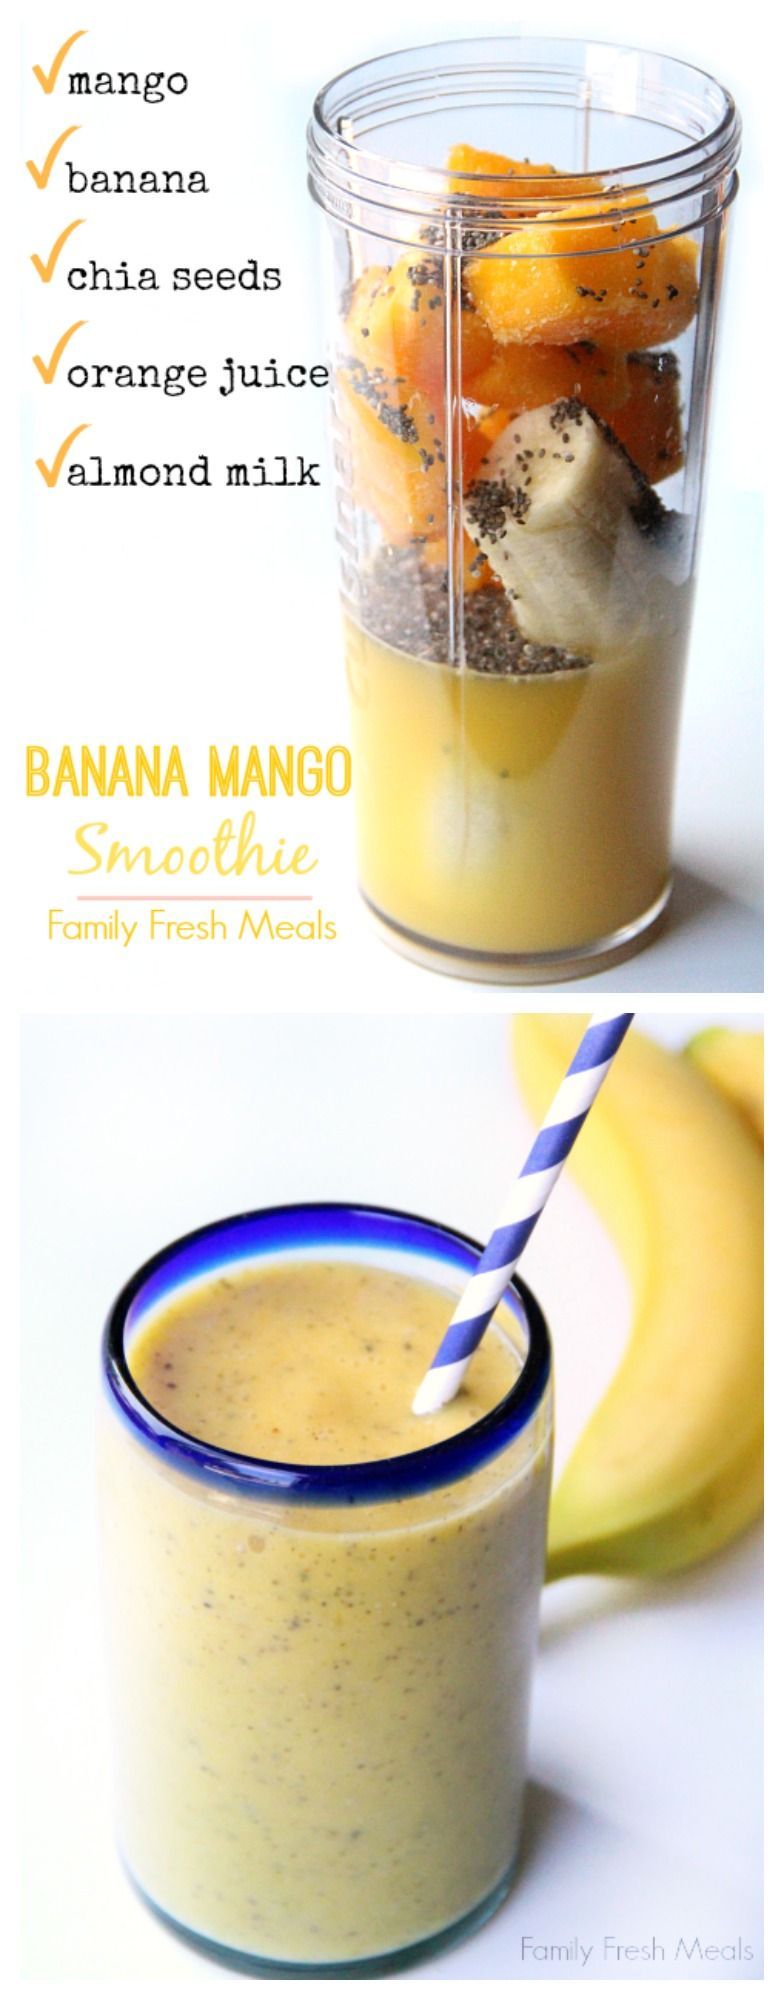 Banana Mango Smooth is the perfect way to start your morning! The kids LOVE this smoothie recipe.